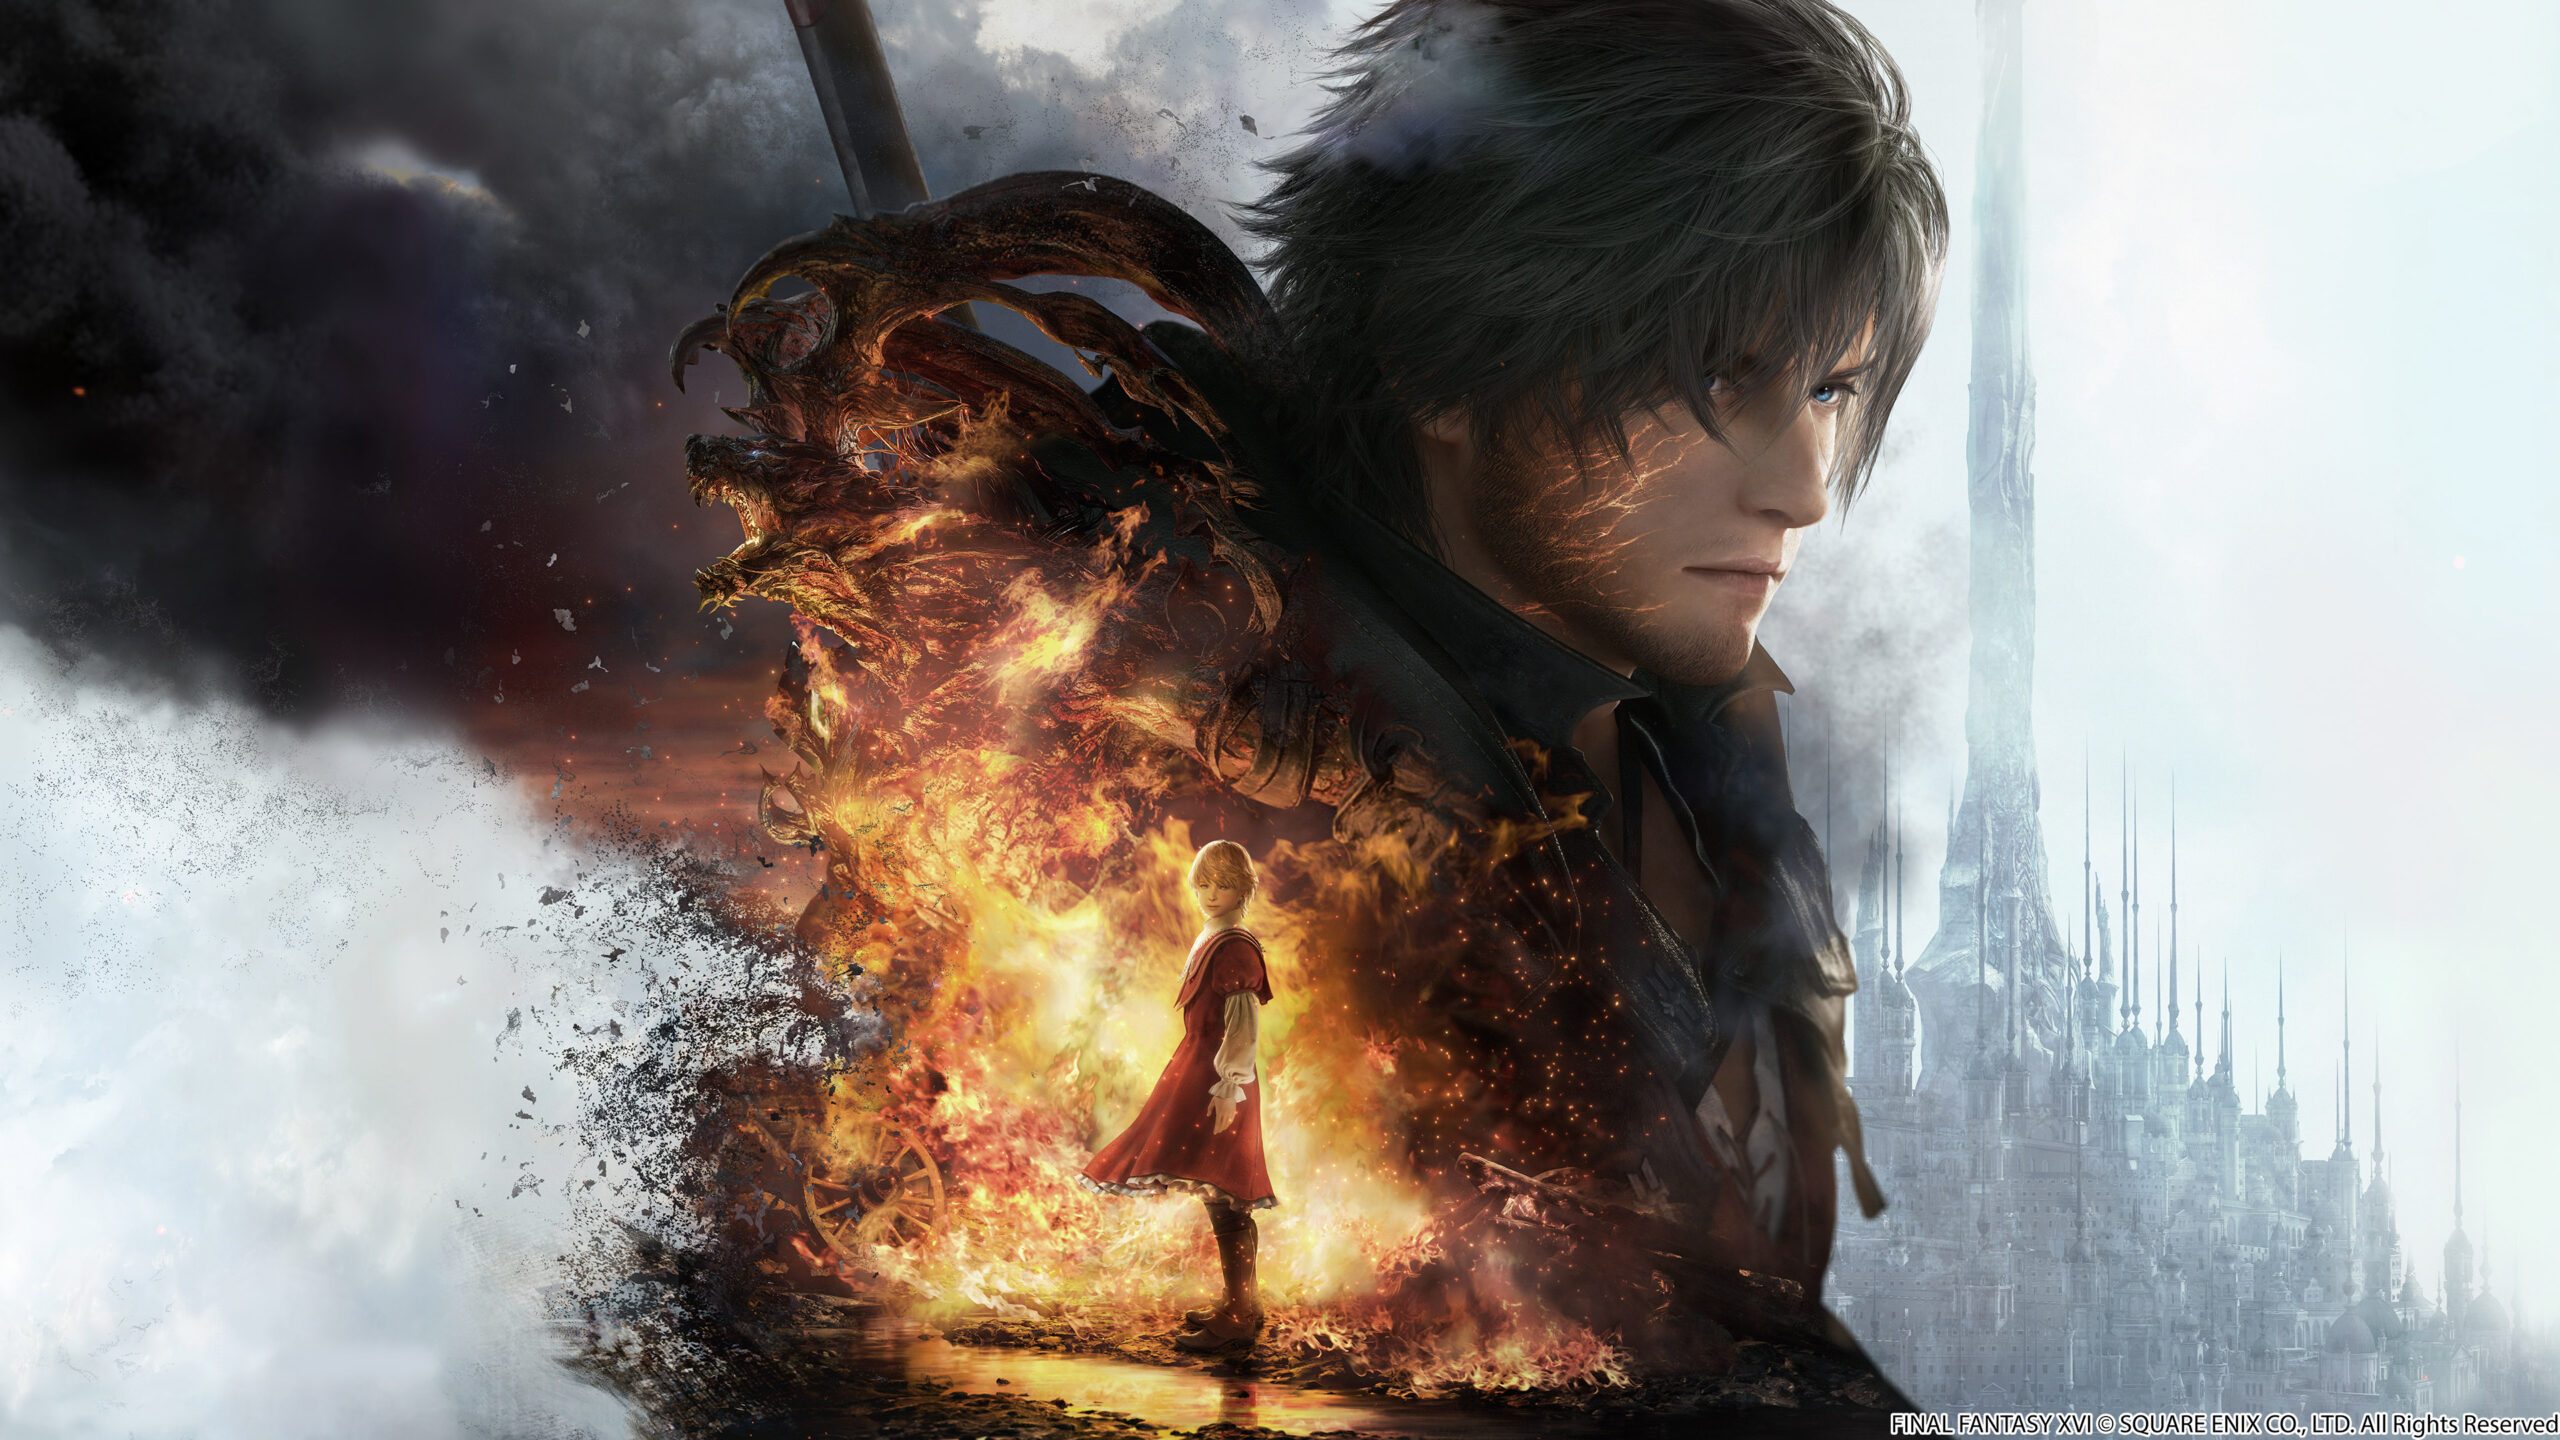 Final Fantasy 16 PC players should consider an SSD a must